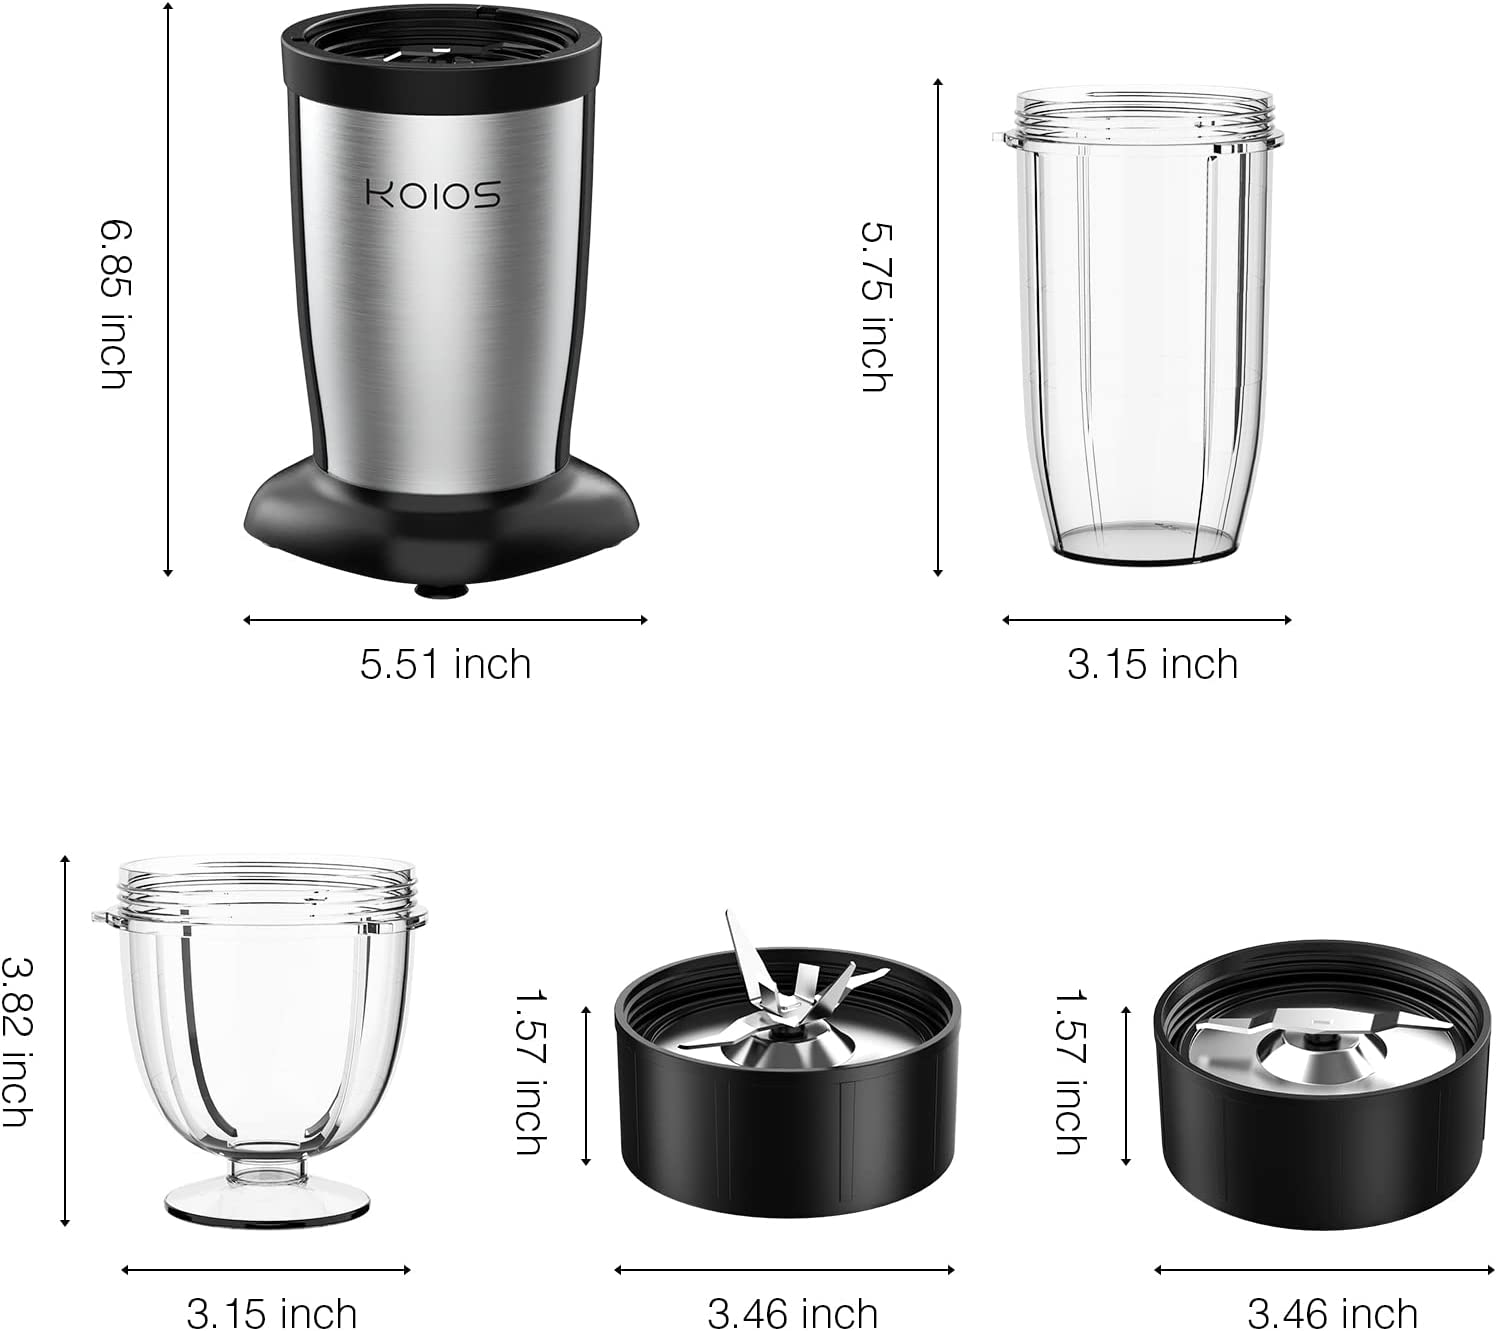 Dropship KOIOS PRO 850W Bullet Personal Blender 11 Pieces Set Blender For  Kitchen Baby Food 2x17 Oz + 10 Oz Large & Small To-Go Cups; 2 Spout  Drinking Lids; Portable Travel Mixer